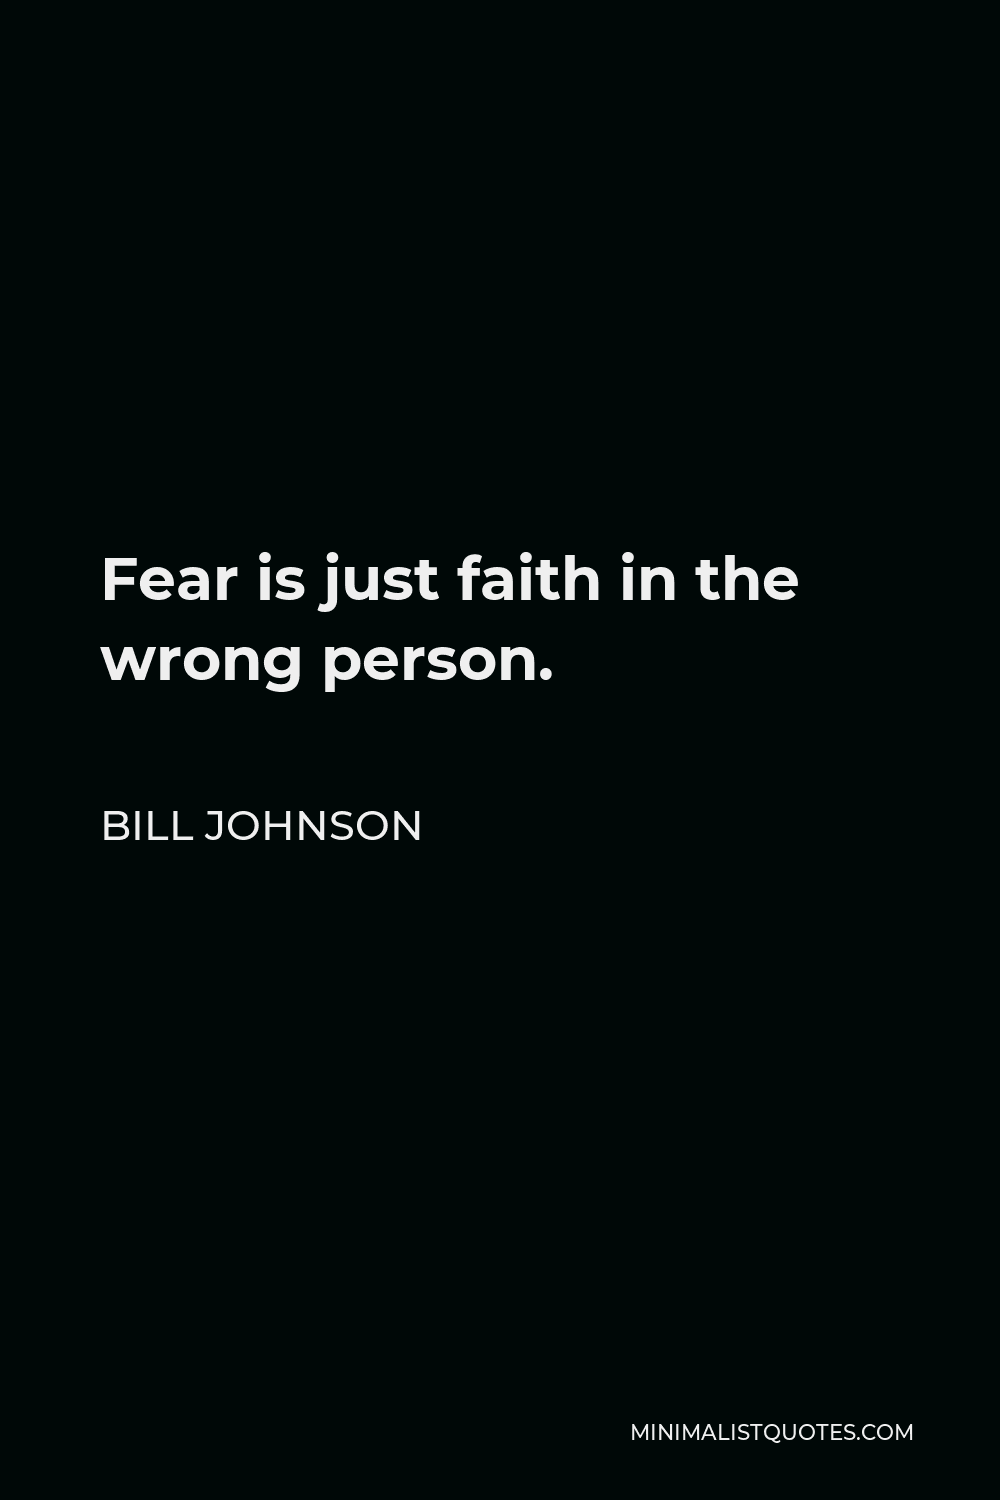 Bill Johnson Quote - Fear is just faith in the wrong person.